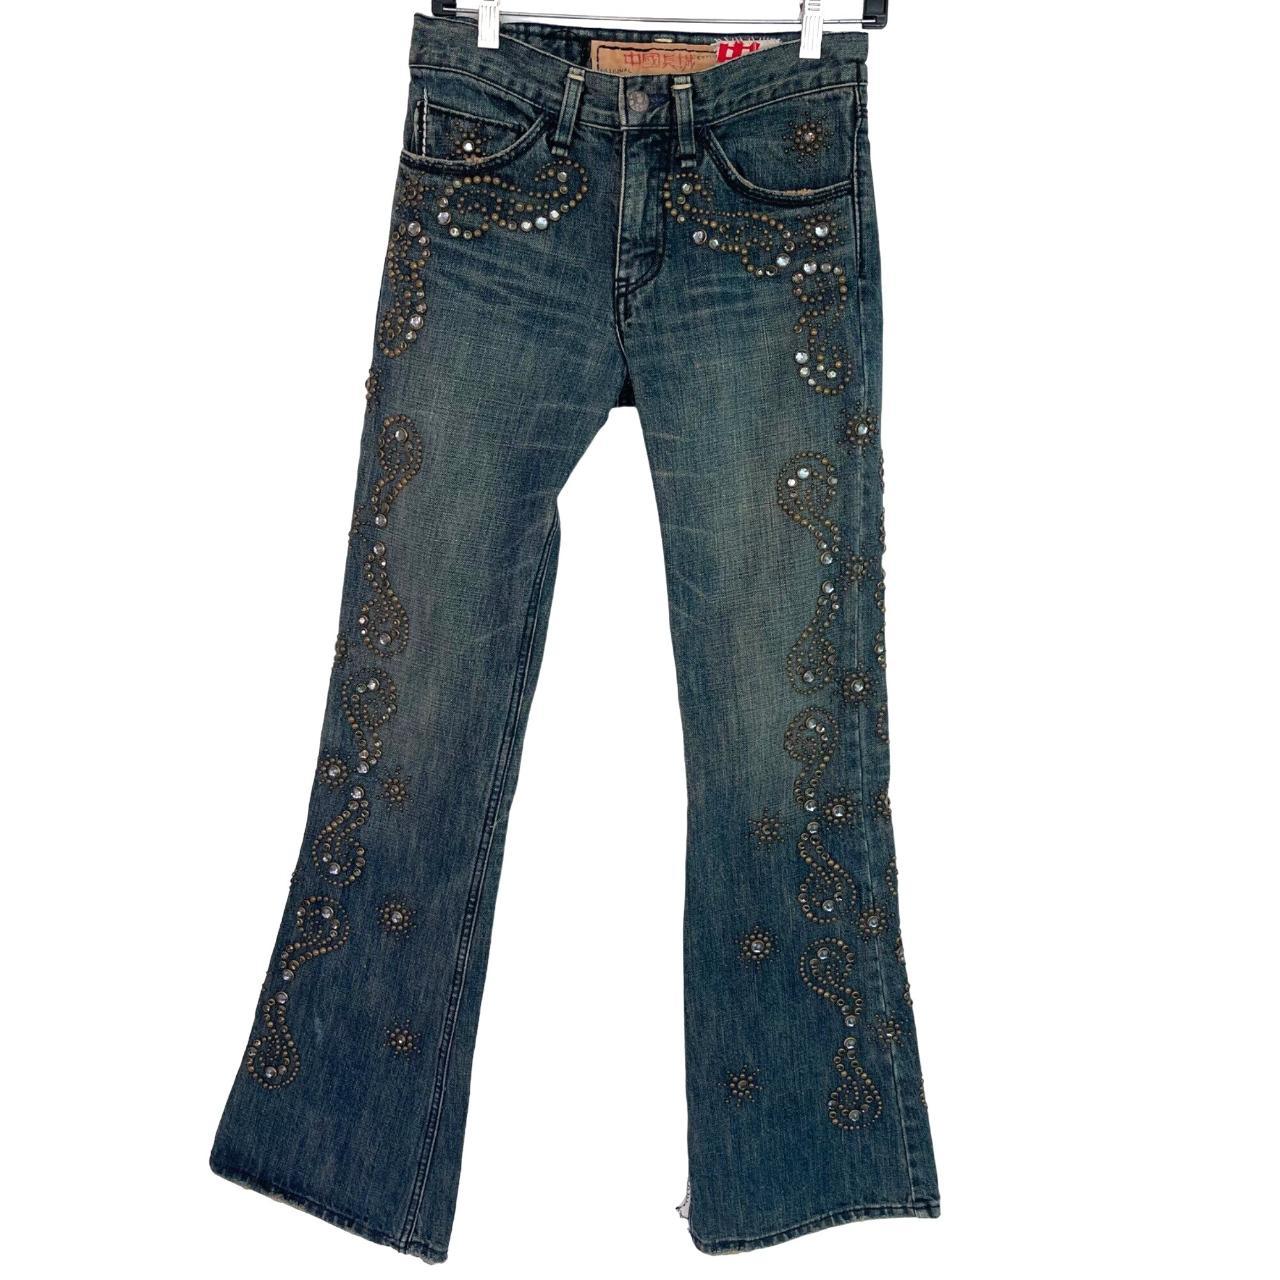 The Great China Wall Womens Jeans Size 27x32 Vintage...